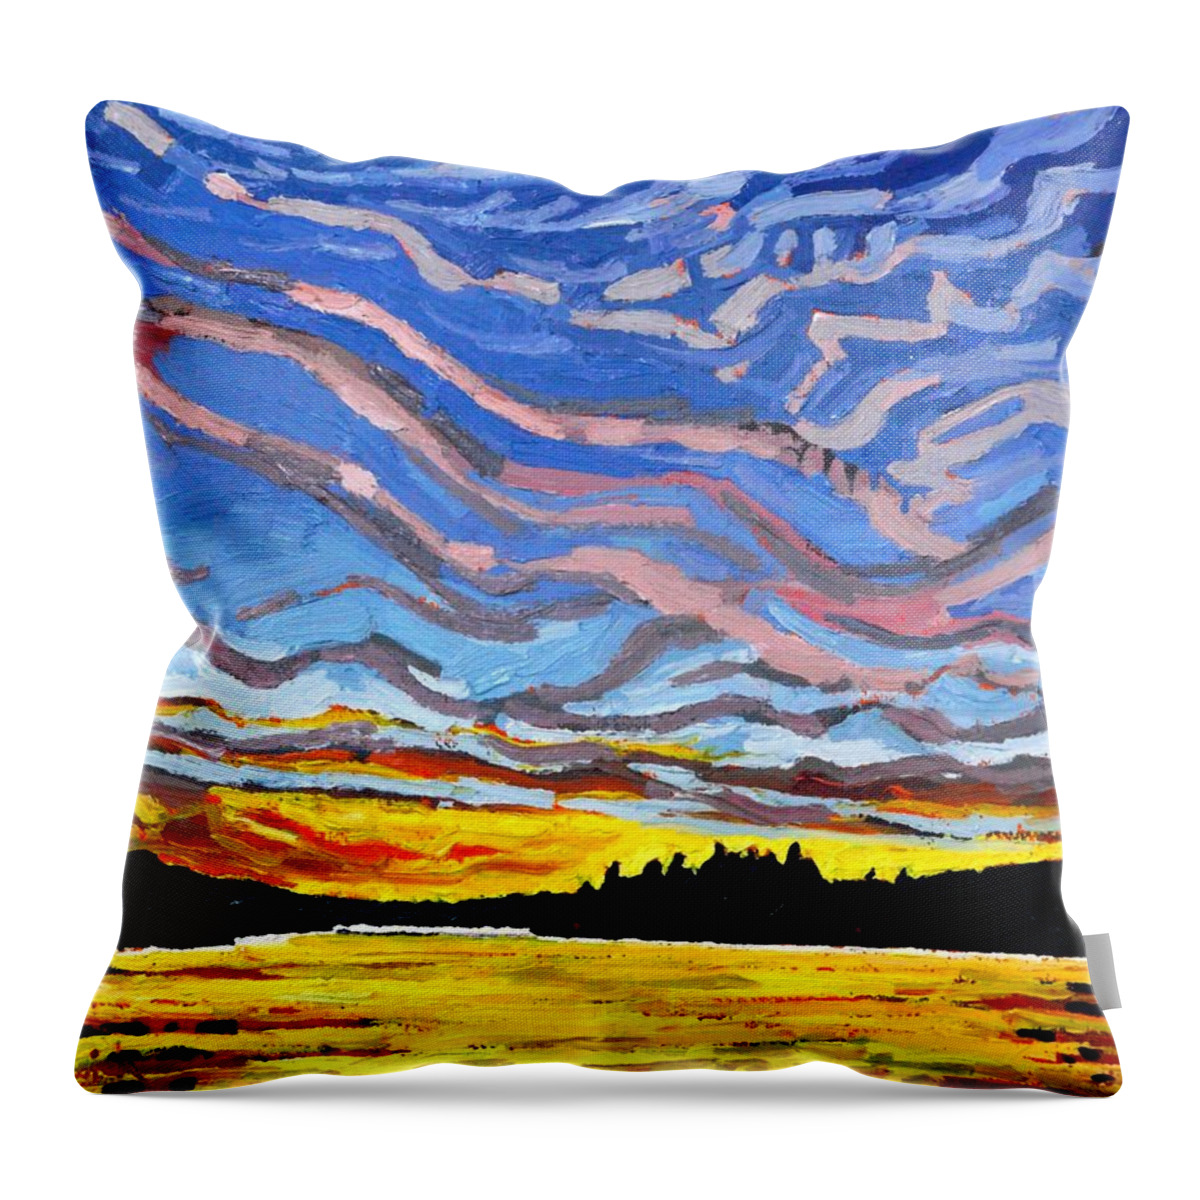 2217 Throw Pillow featuring the painting Canine Cove Cirrus Sunset by Phil Chadwick